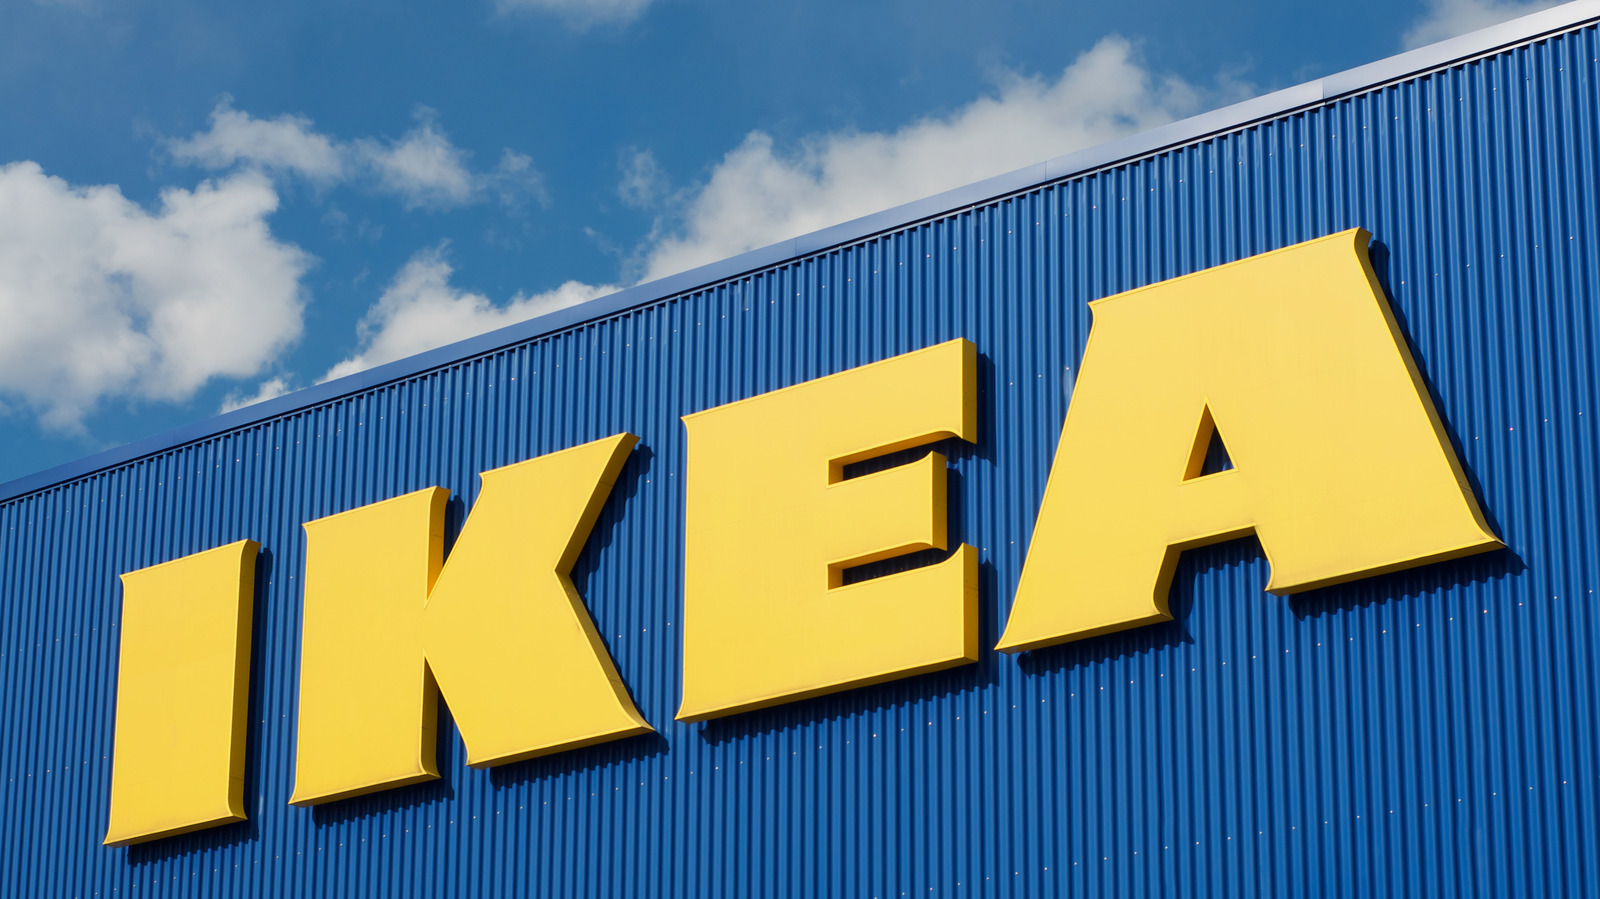 Ikea's Secrets To Keeping Their Prices Low